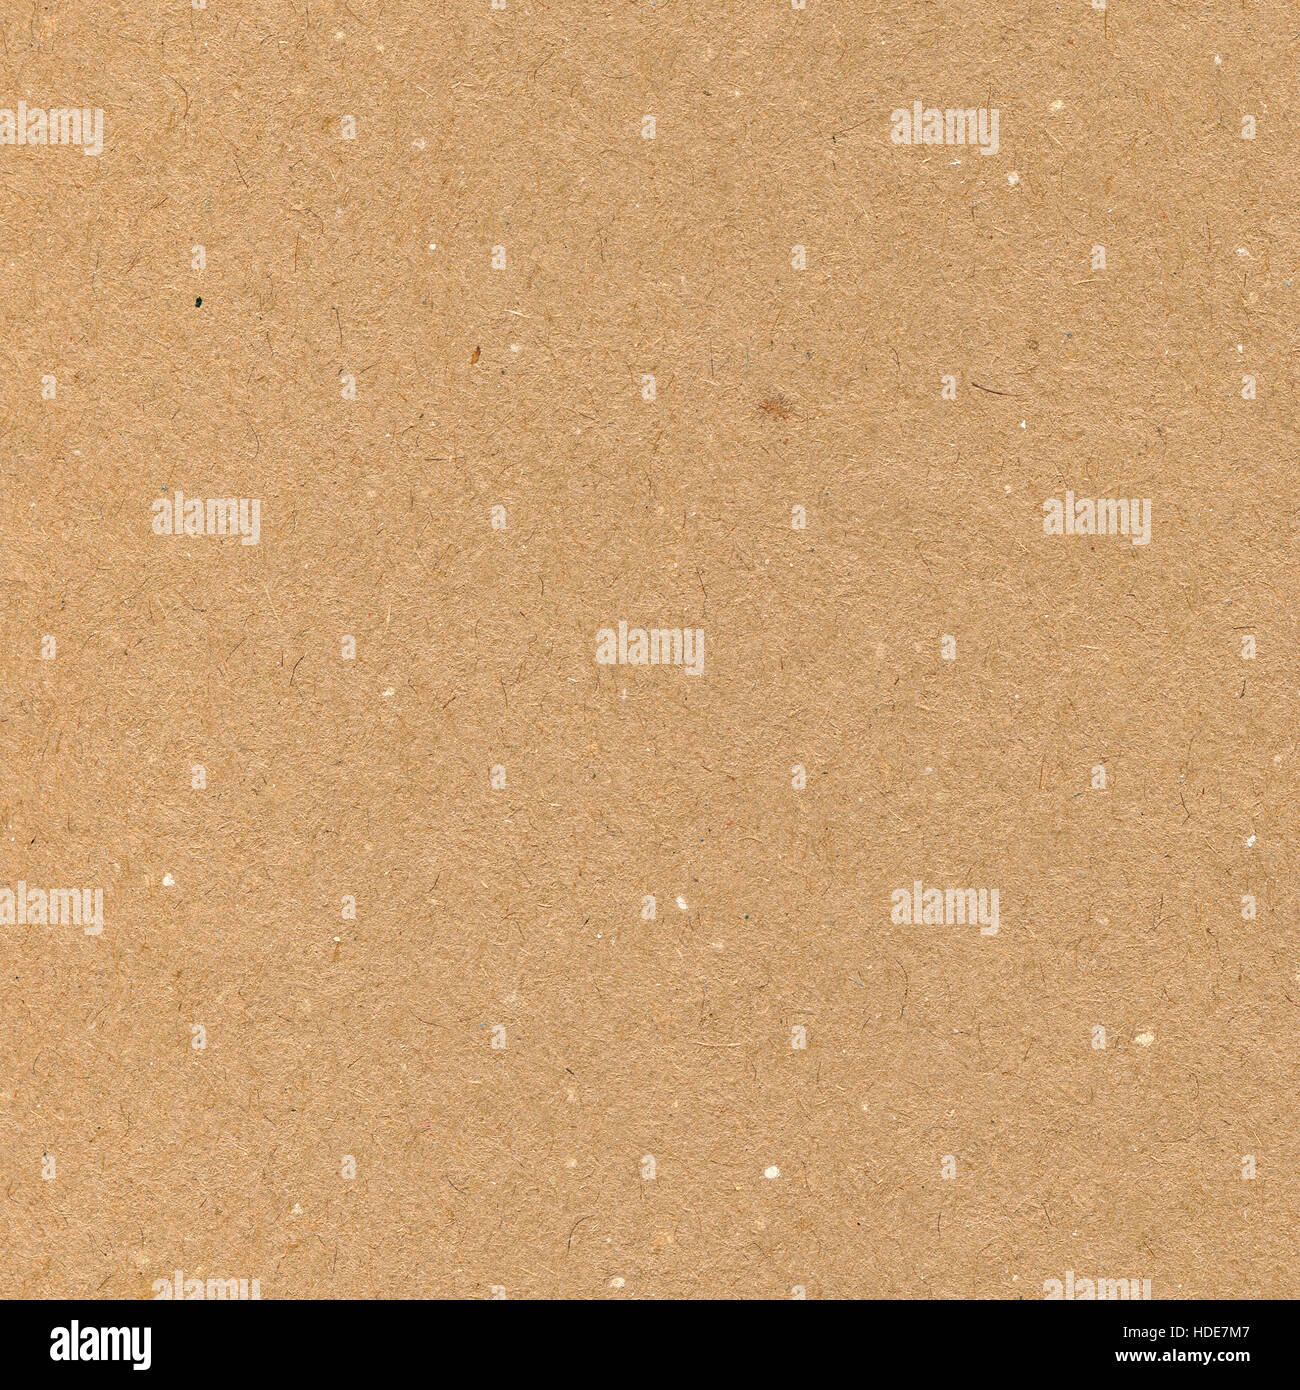 Wrapping Paper Brown Cardboard Texture for Background Usage. Stock